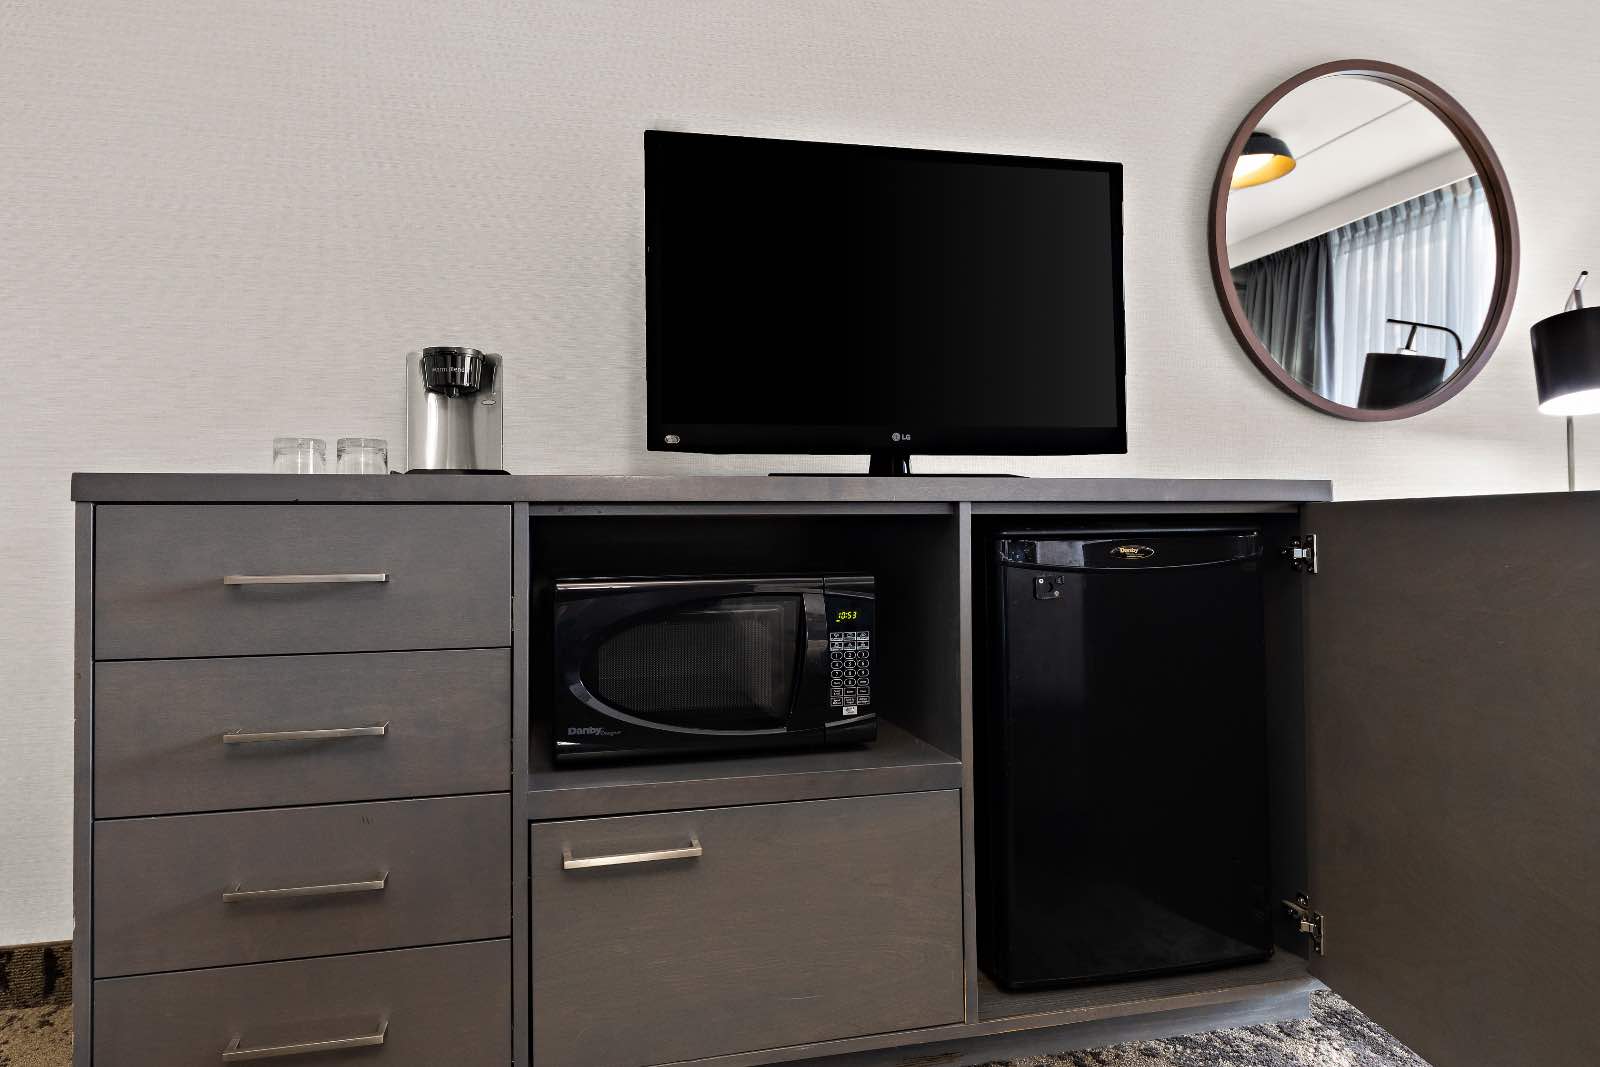 Best Western Parkway hotel room with TV, fridge and microwave